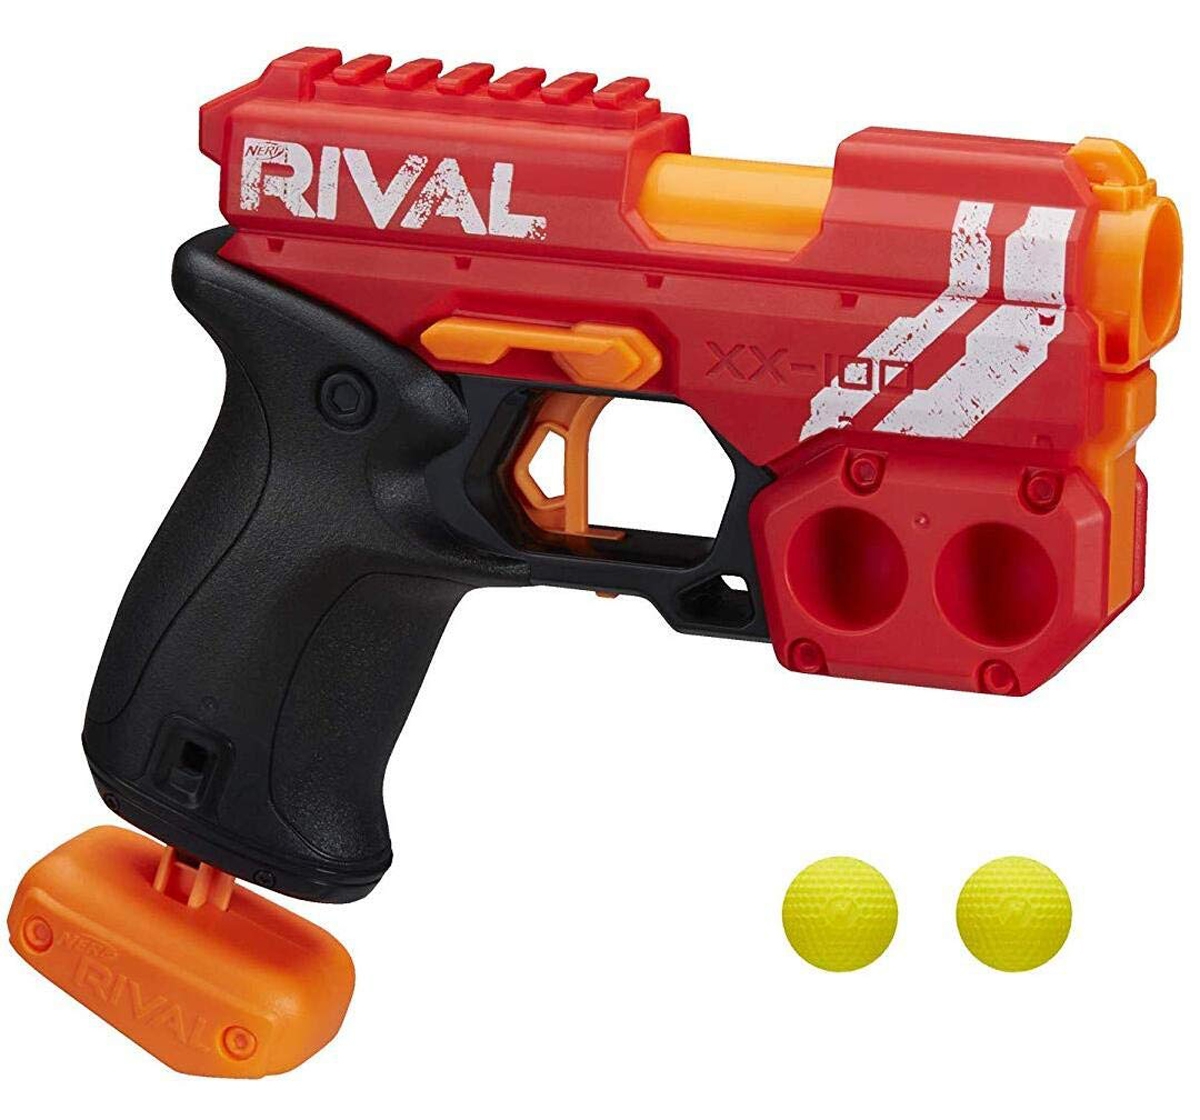 Nerf Rival Knockout XX 100 Blaster Toy for kids 14Y+, Multicolour